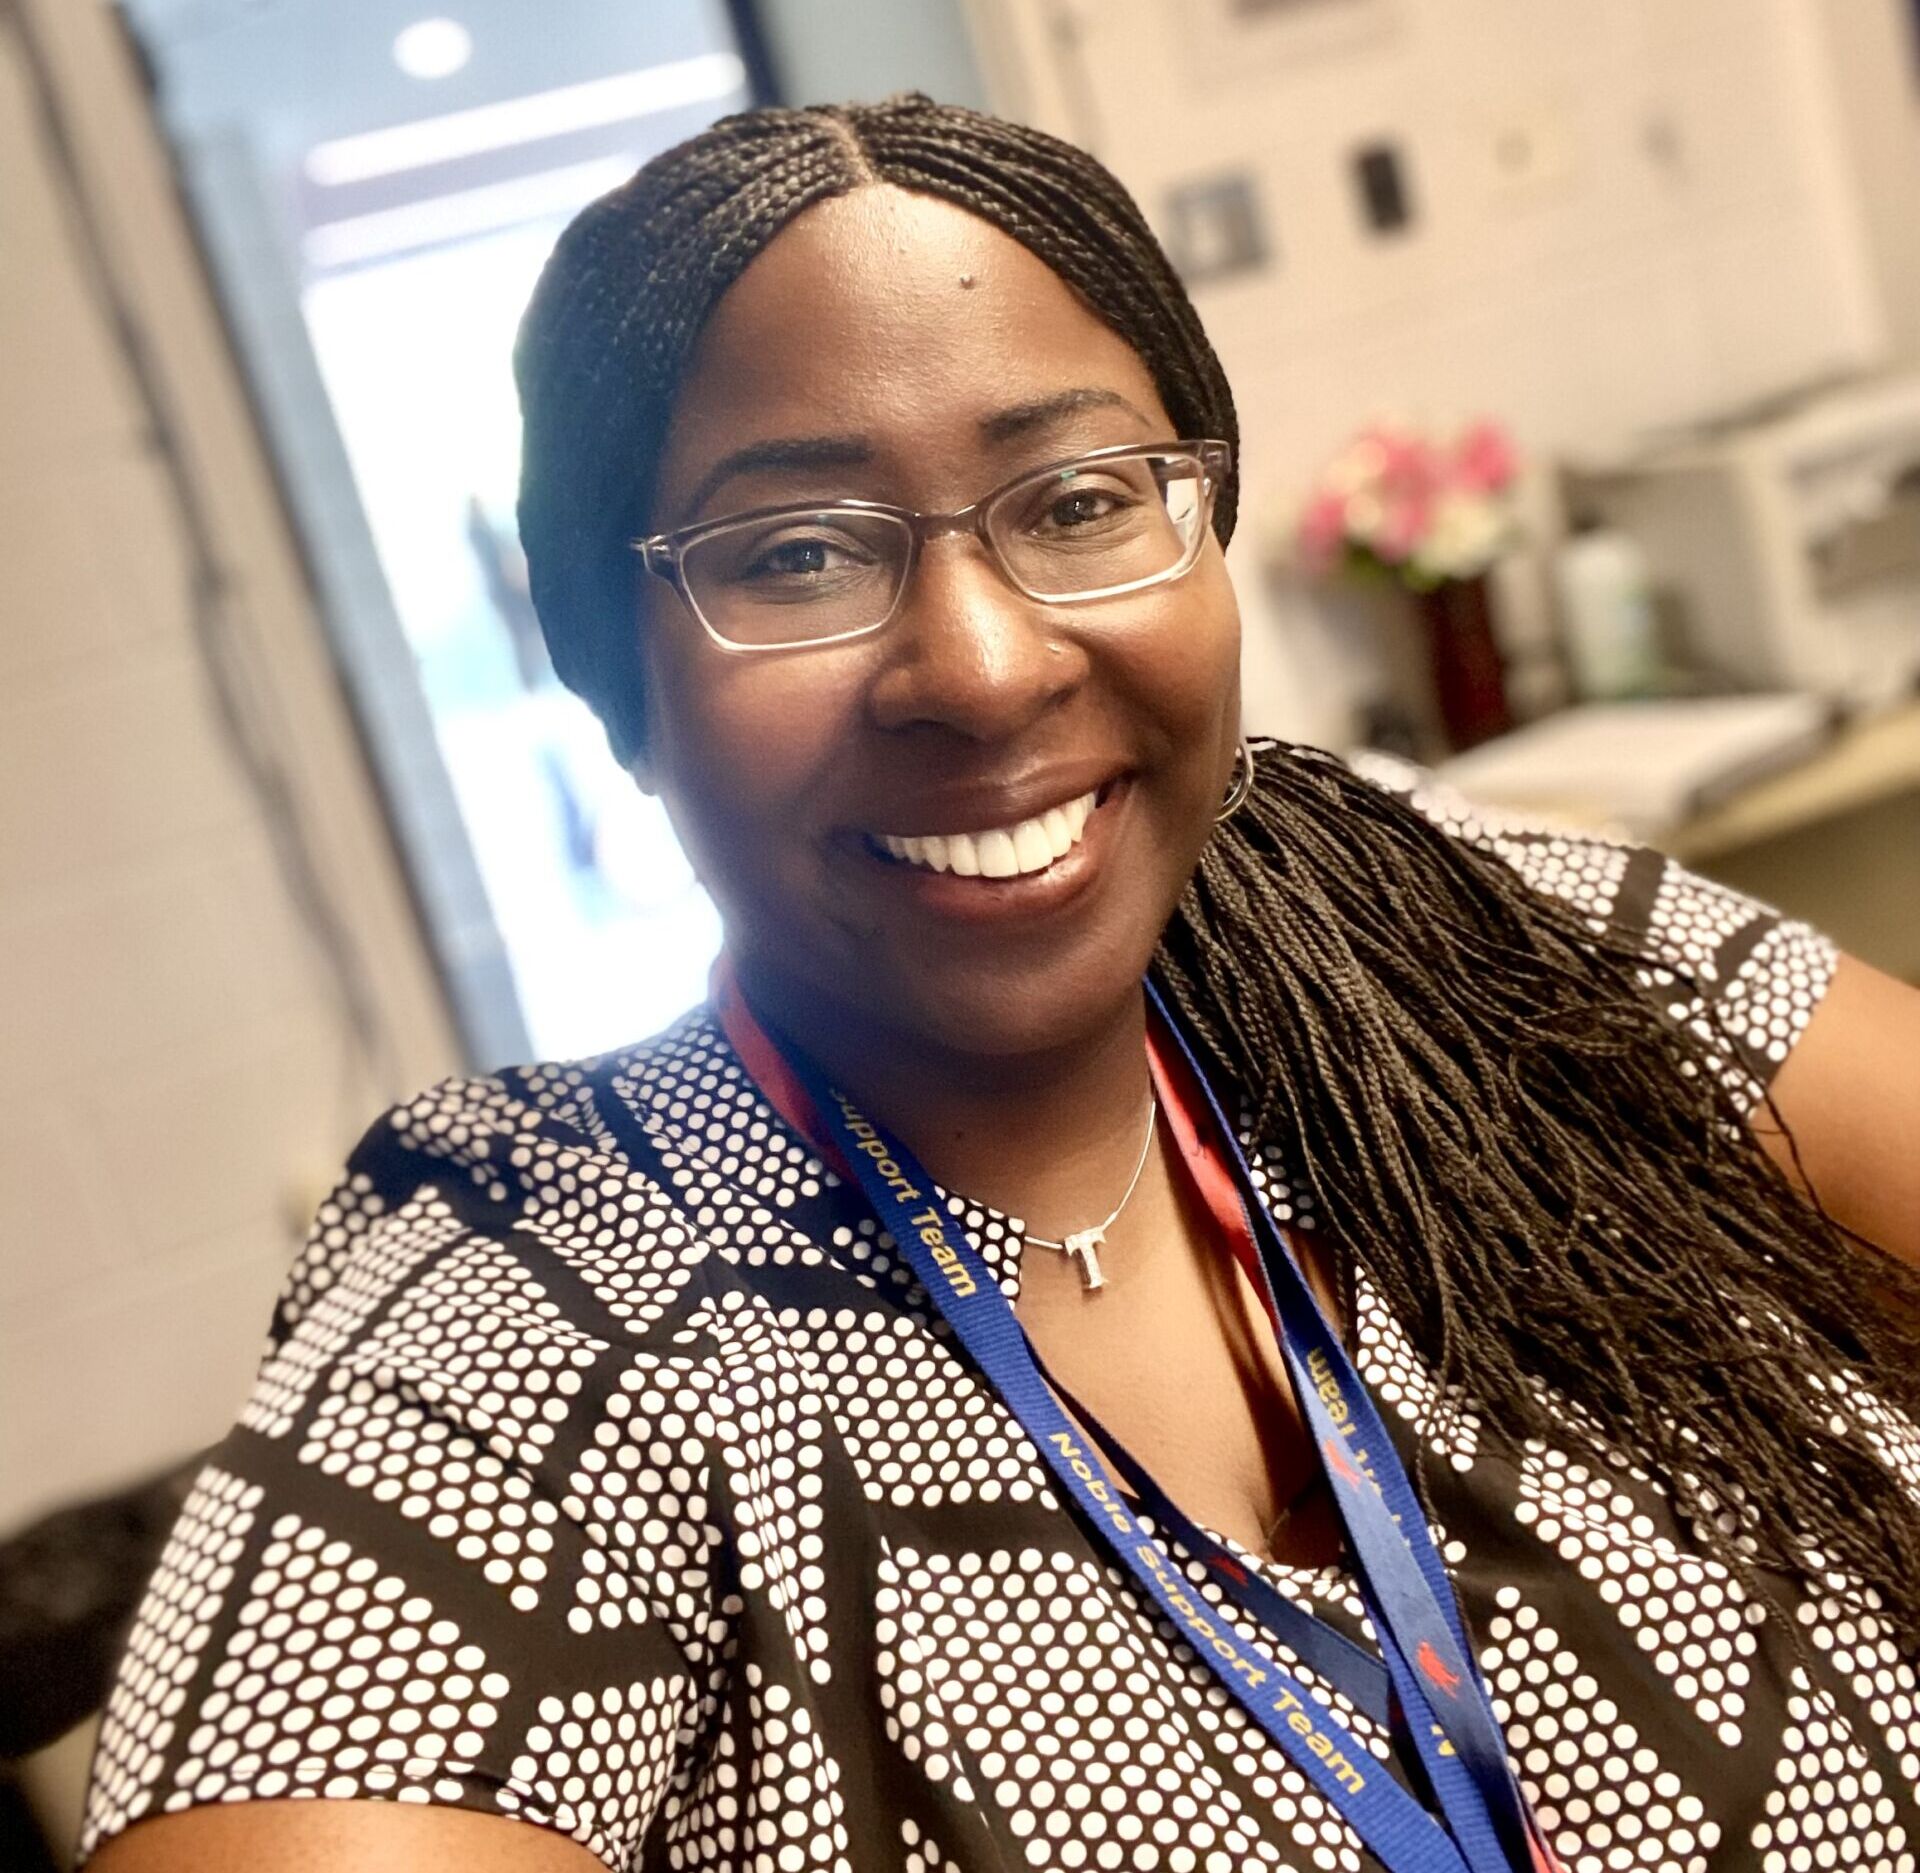 Photo shows a shoulders and up selfie of Dr. Tiffani Farrow, a school psychologist at Noble Schools. She is wearing a dark blue lanyard that has yellow text on it that reads "Noble Support Team". In the background, you can see some of her office at Johnson College Prep.